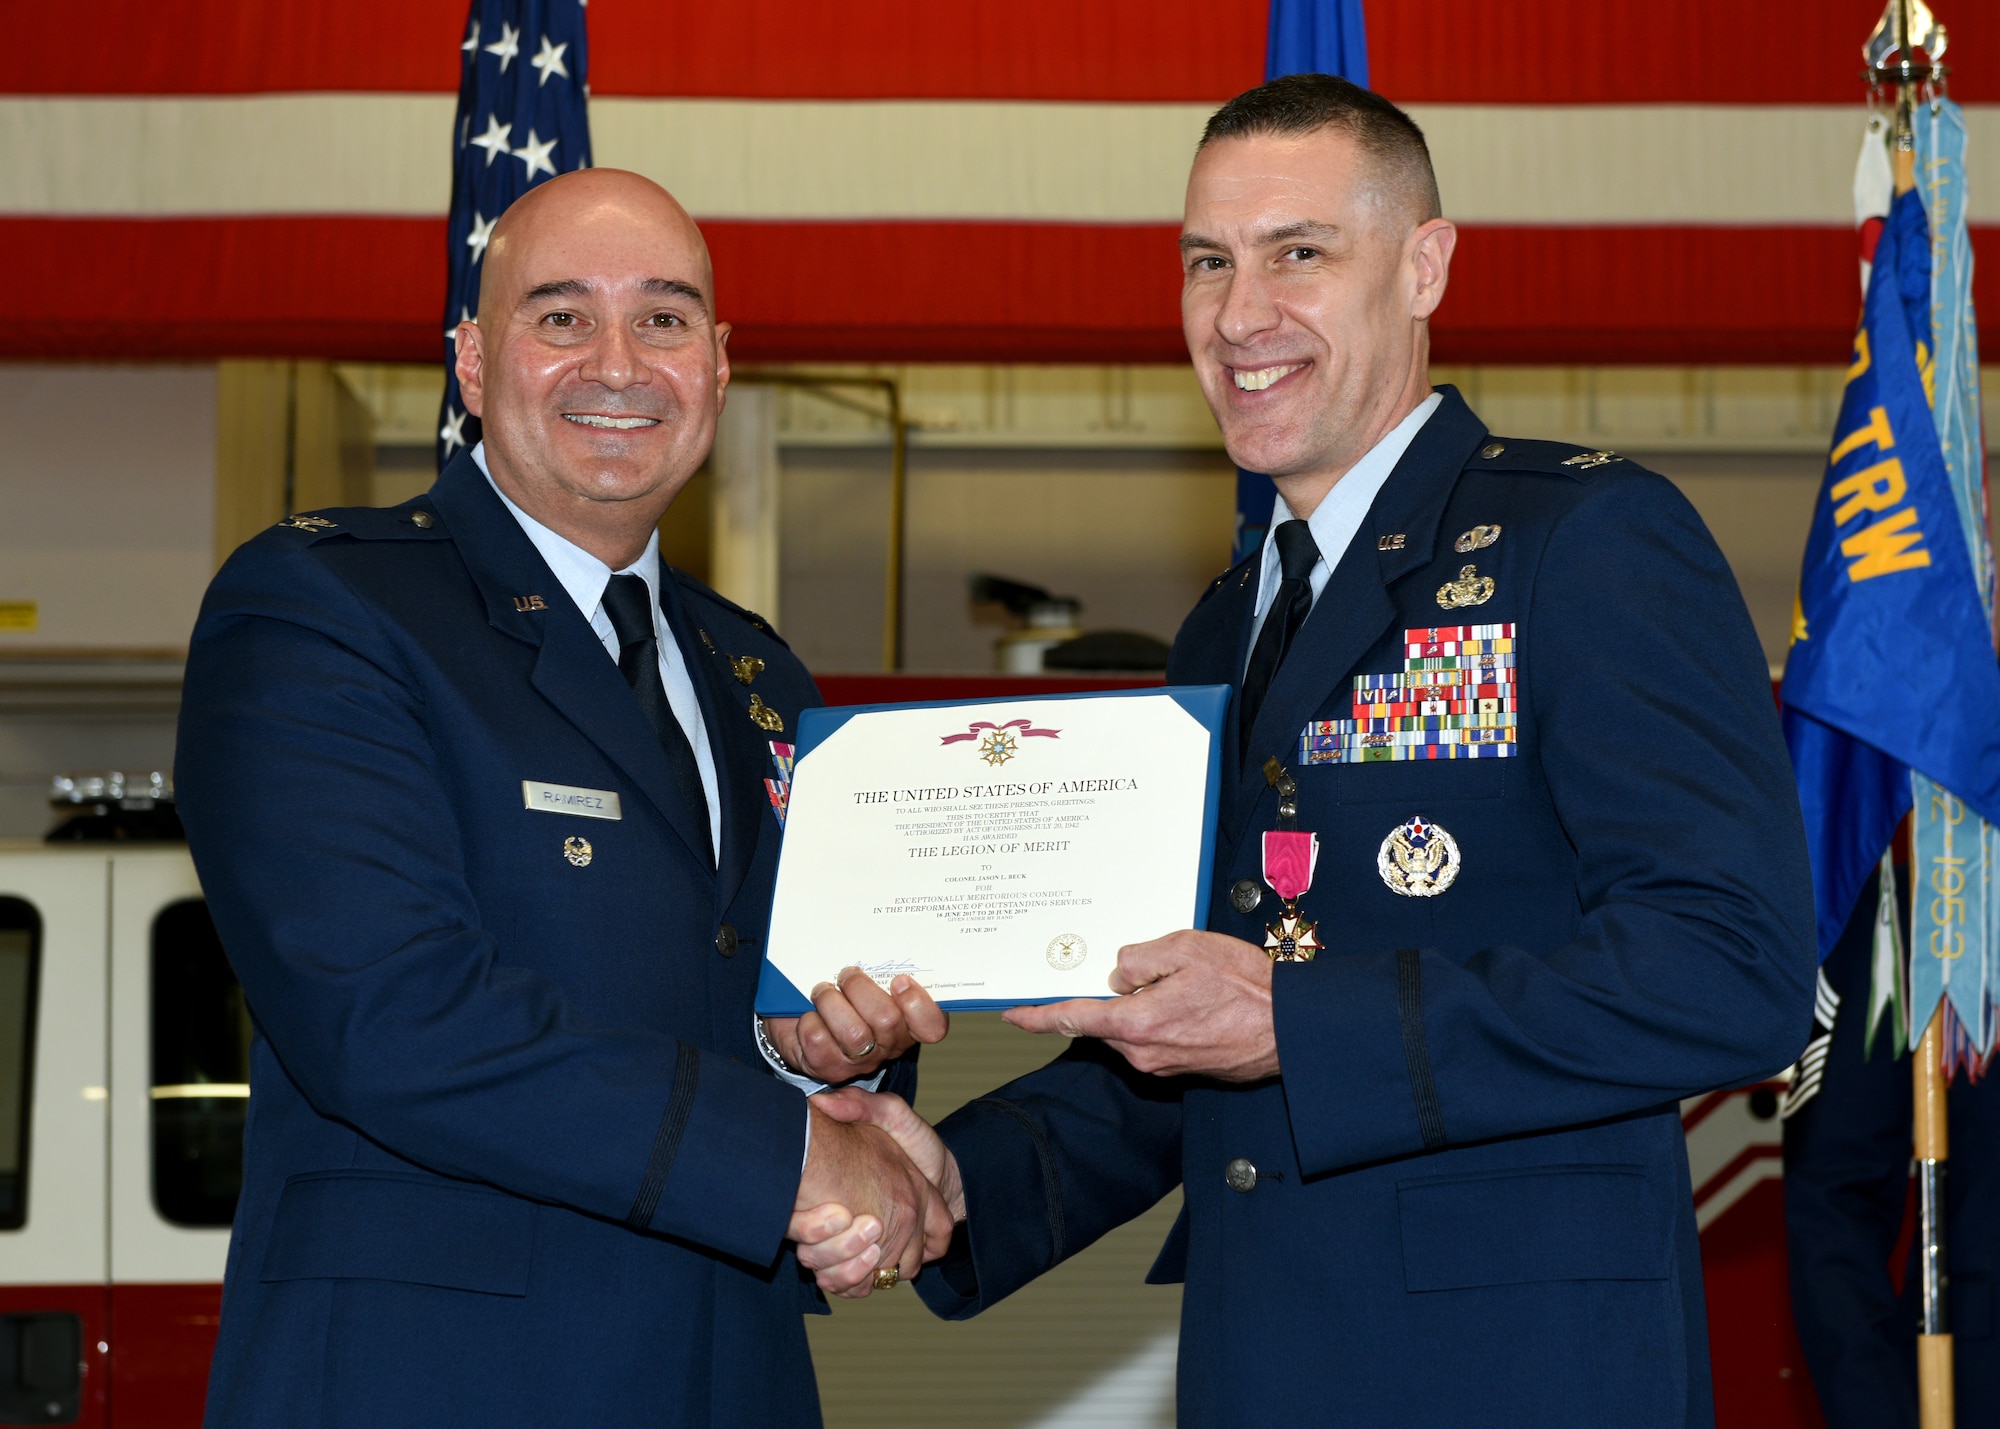 U.S. Air Force Col. Robert Ramirez, 17th Training Wing vice commander, presents Col. Jason Beck, 17th Mission Support Group outgoing commander, the Air Force Legion of Merit Medal during the change of command ceremony at the Transportation Complex on Goodfellow Air Force Base, Texas, June 20, 2019. As the commander of the 17th MSG, Beck oversaw over 900 military and civilian personnel delivering security, communications, logistics, civil engineering, contracting, and community support programs for the base. (U.S. Air Force photo by Airman 1st Class Robyn Hunsinger/Released)